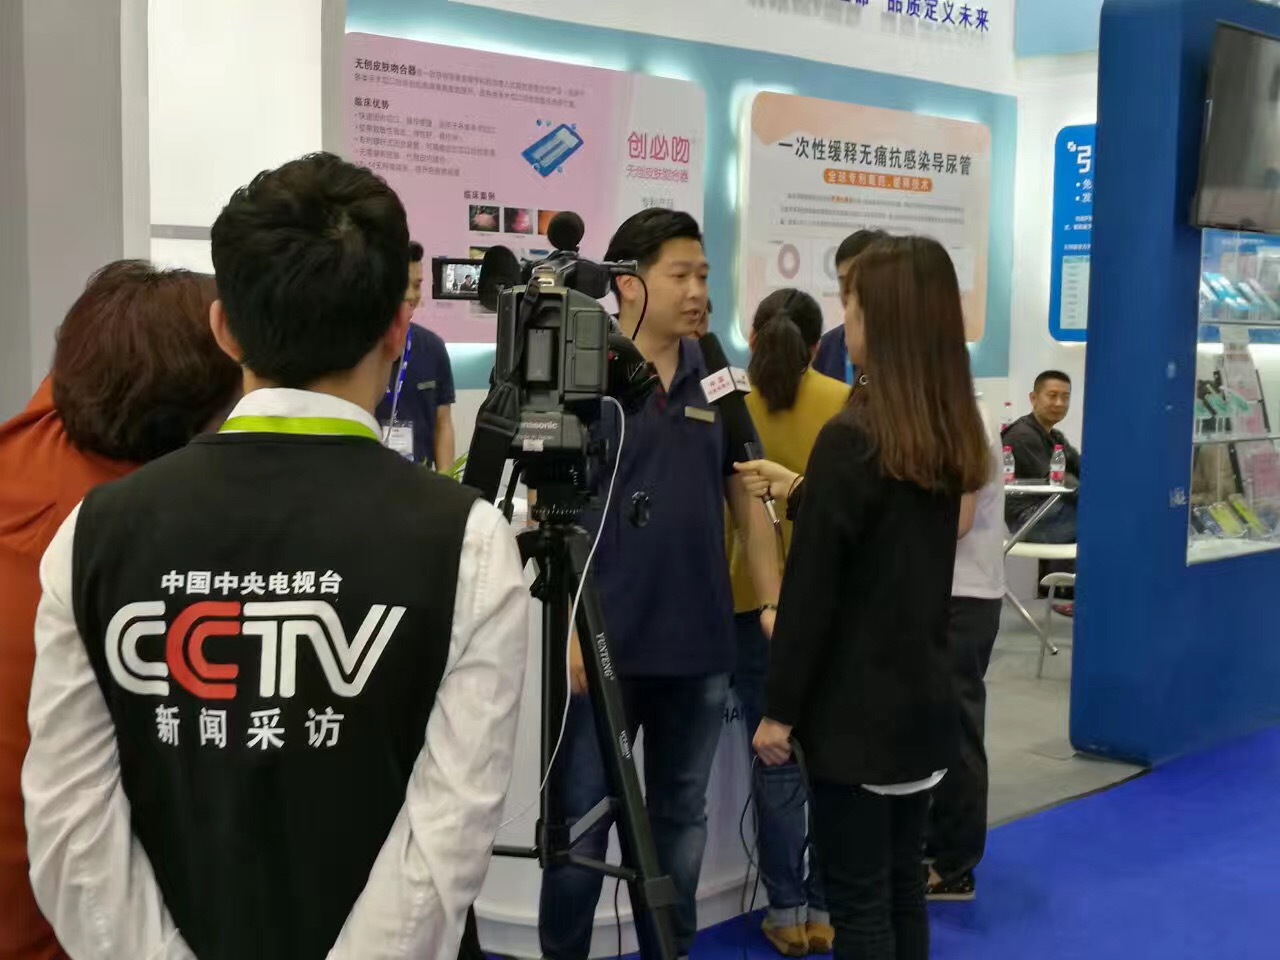 Haichuang successful participation in CMEF2017 ( Spring )